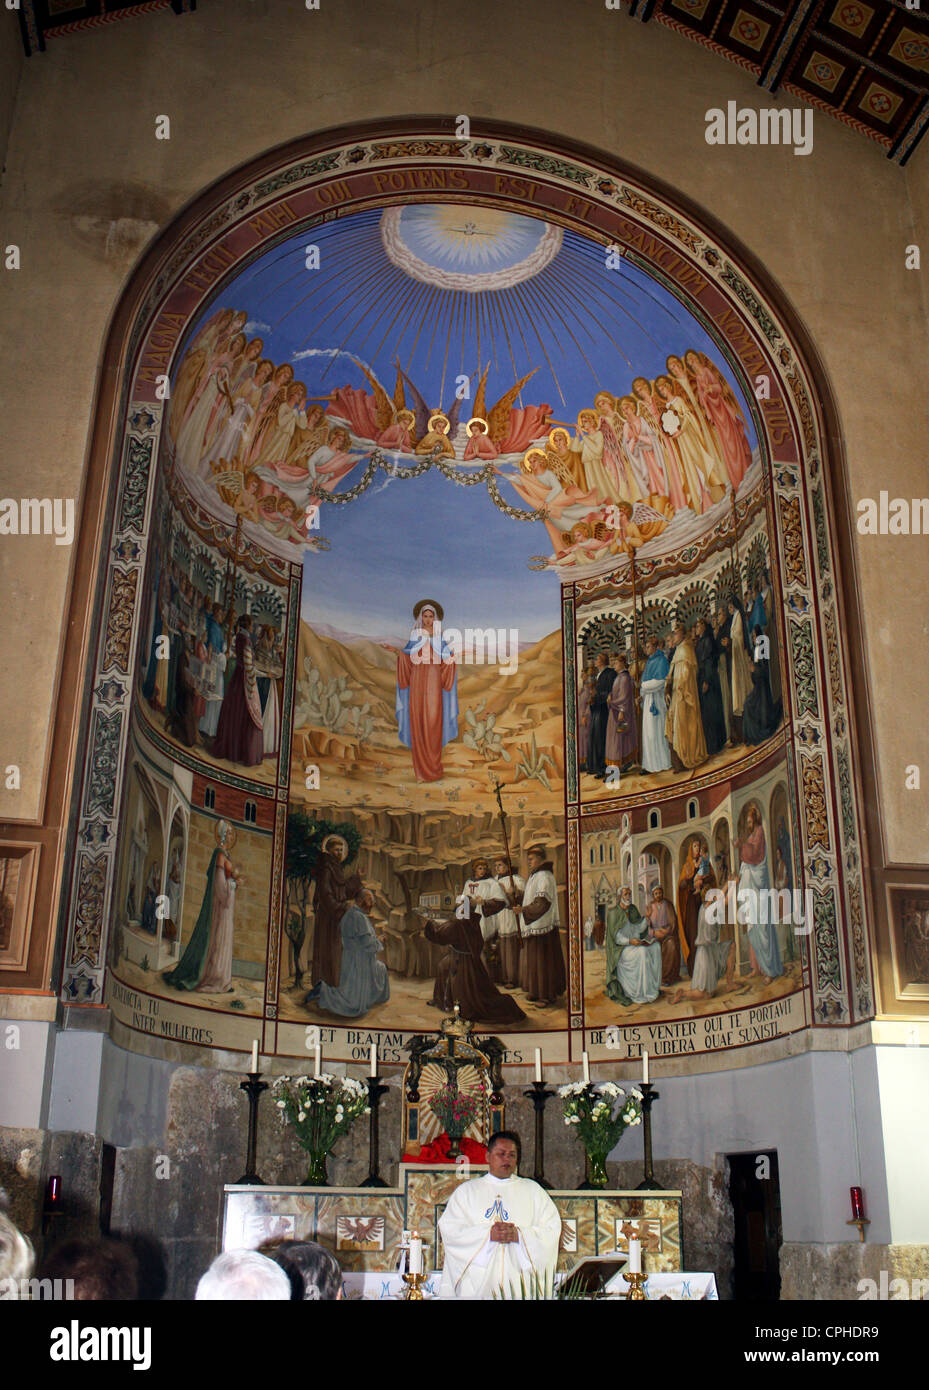 The Church of the Visitation located at Ein Kerem Israel inside altar Stock Photo